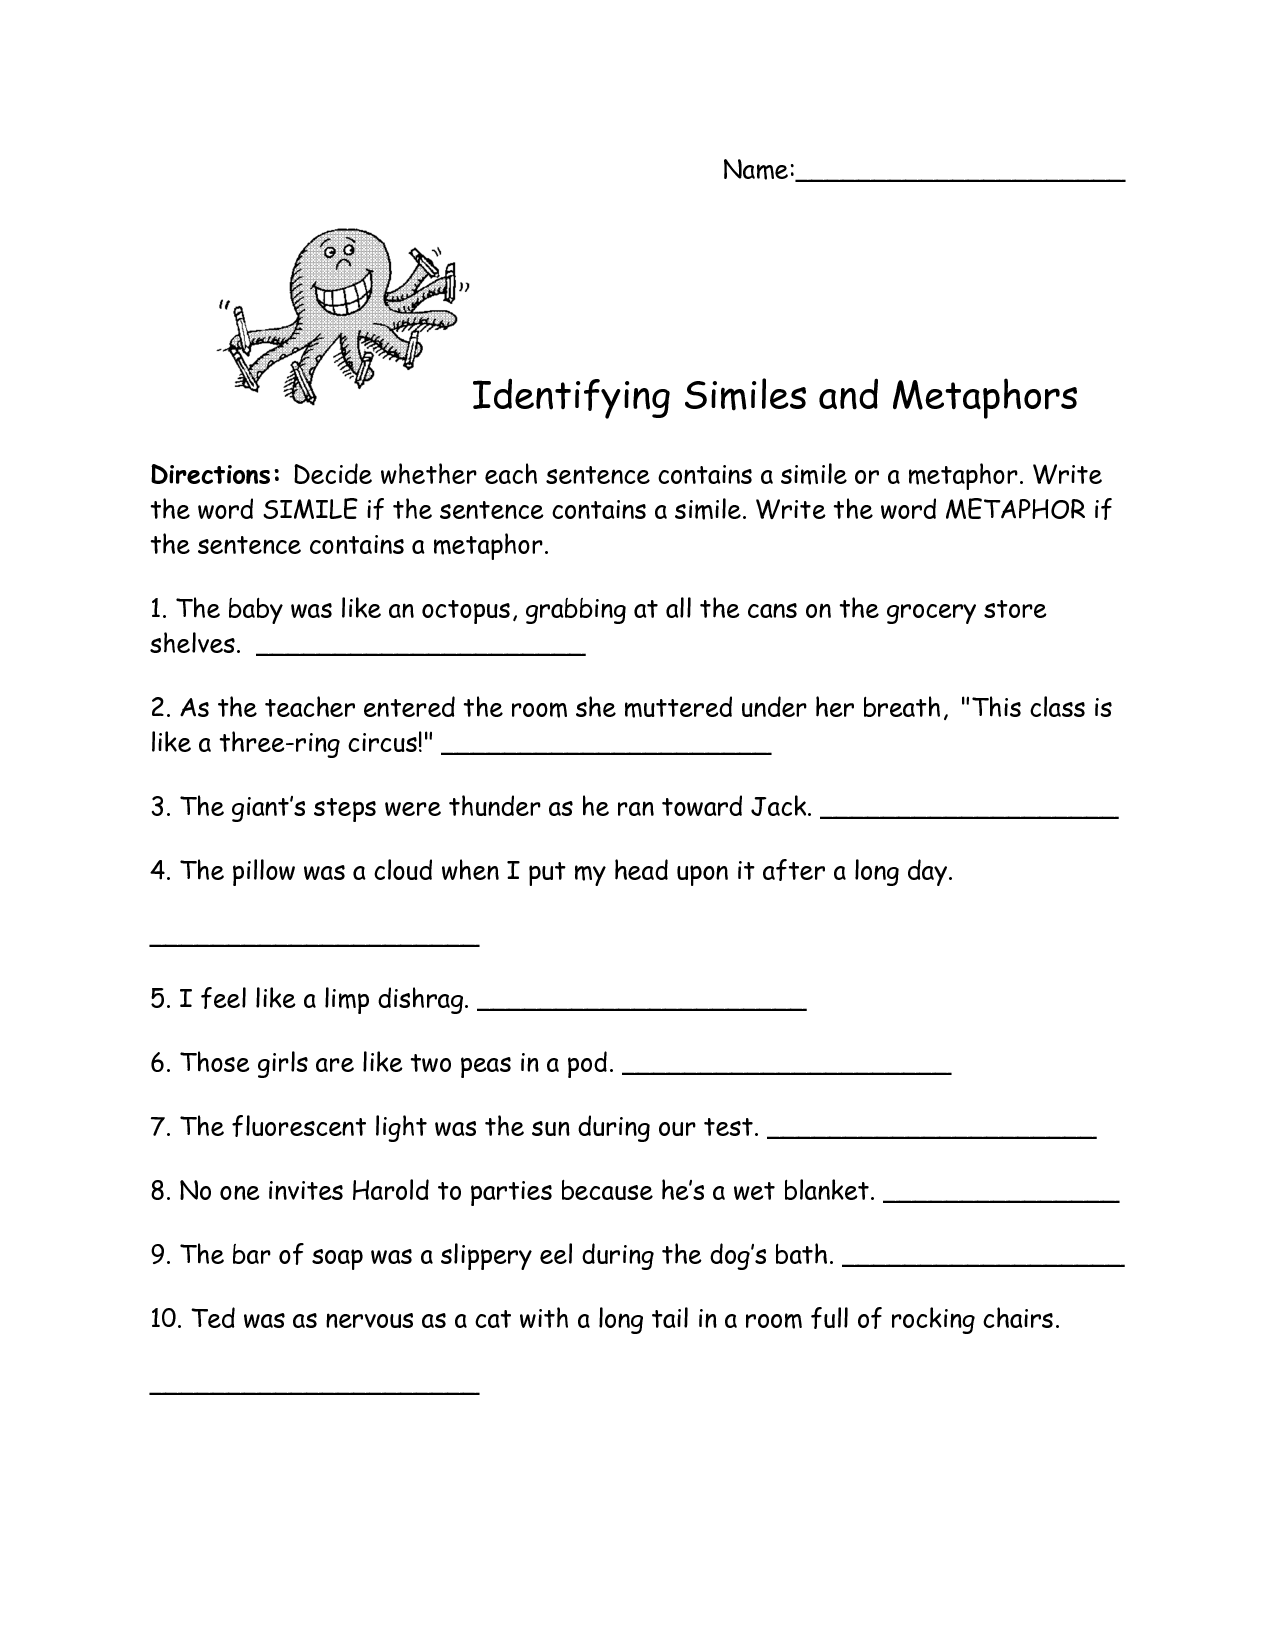 13 Best Images of Free Simile And Metaphor Worksheets Simile Metaphor